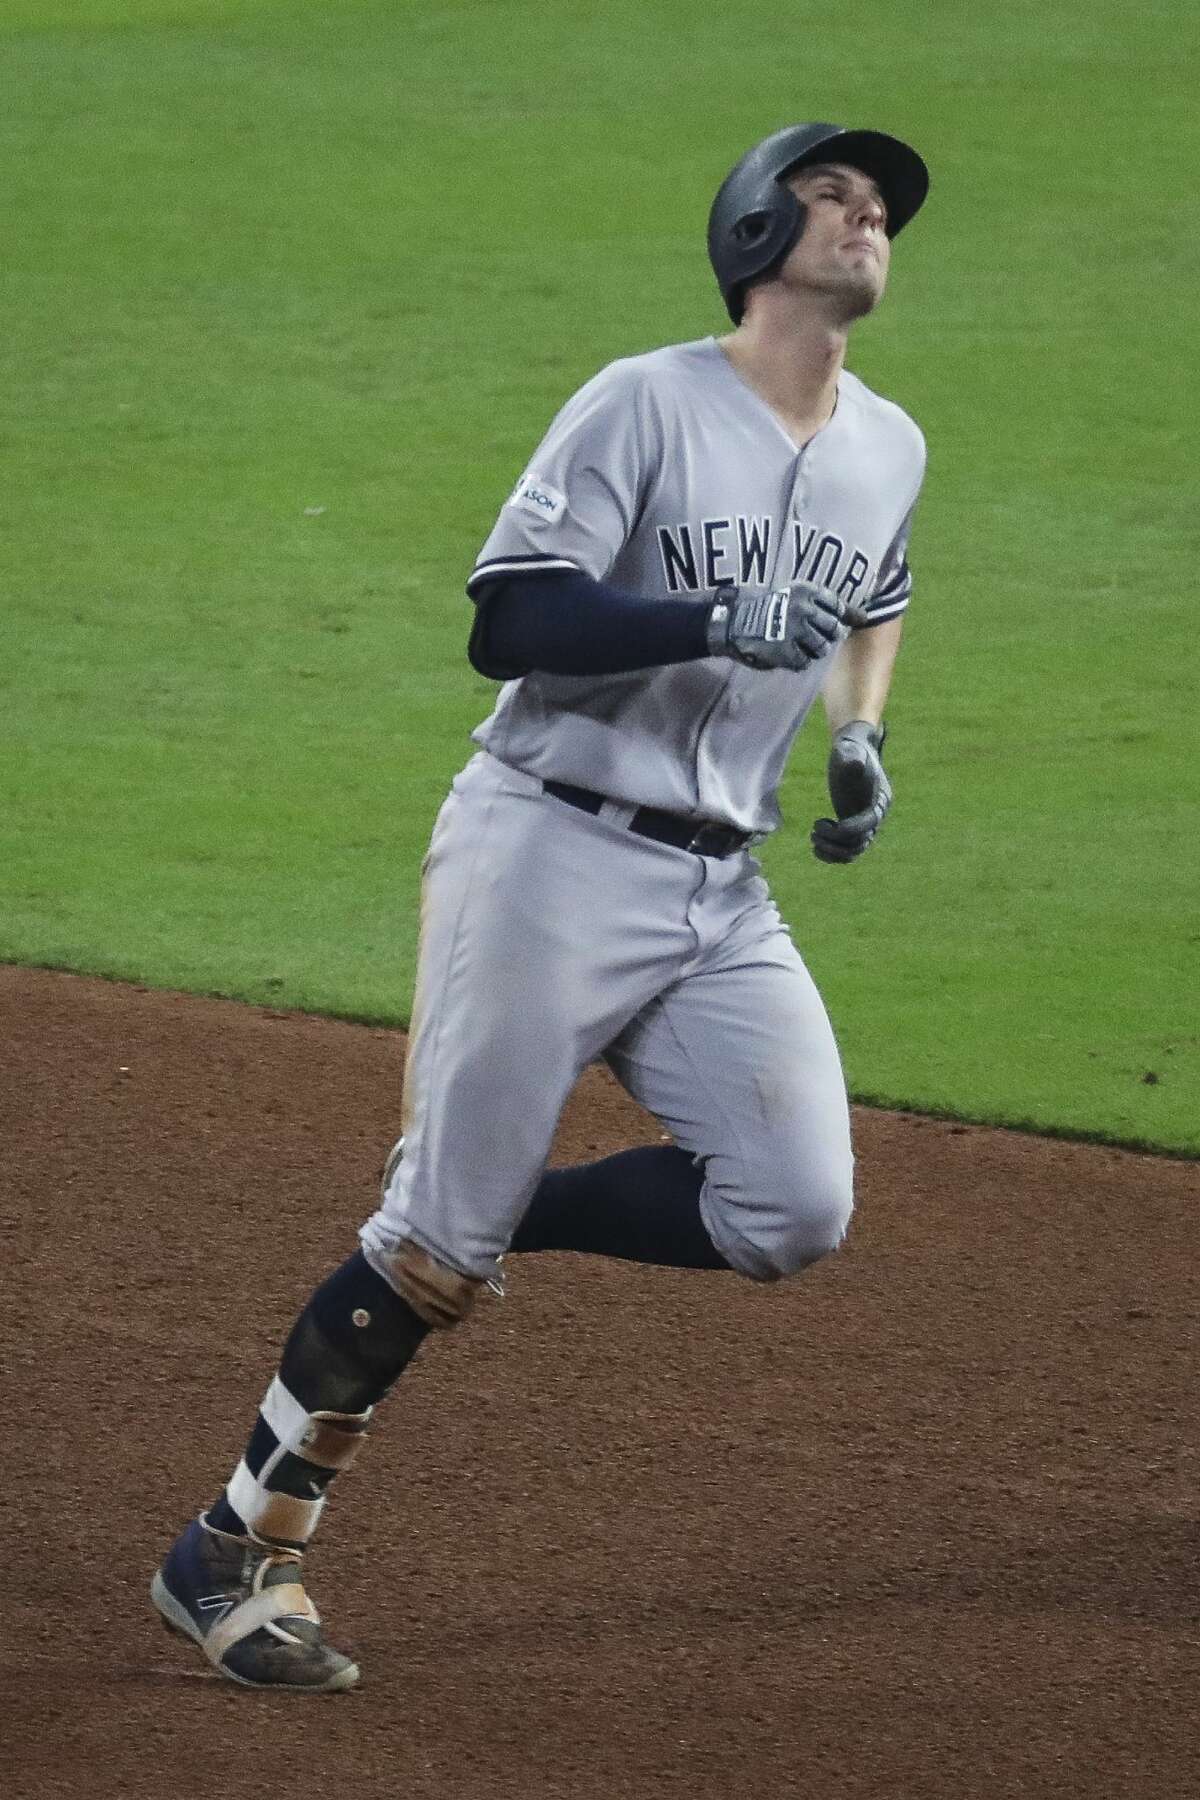 New York Yankees first baseman Greg Bird (33) reacts as Houston Astros center fielder George Springer (4) catches his hit during the seventh inning as the Houston Astros take on the New York Yankees in Game 7 of the ALCS at Minute Maid Park Saturday, Oct. 21, 2017 in Houston. ( Michael Ciaglo / Houston Chronicle)